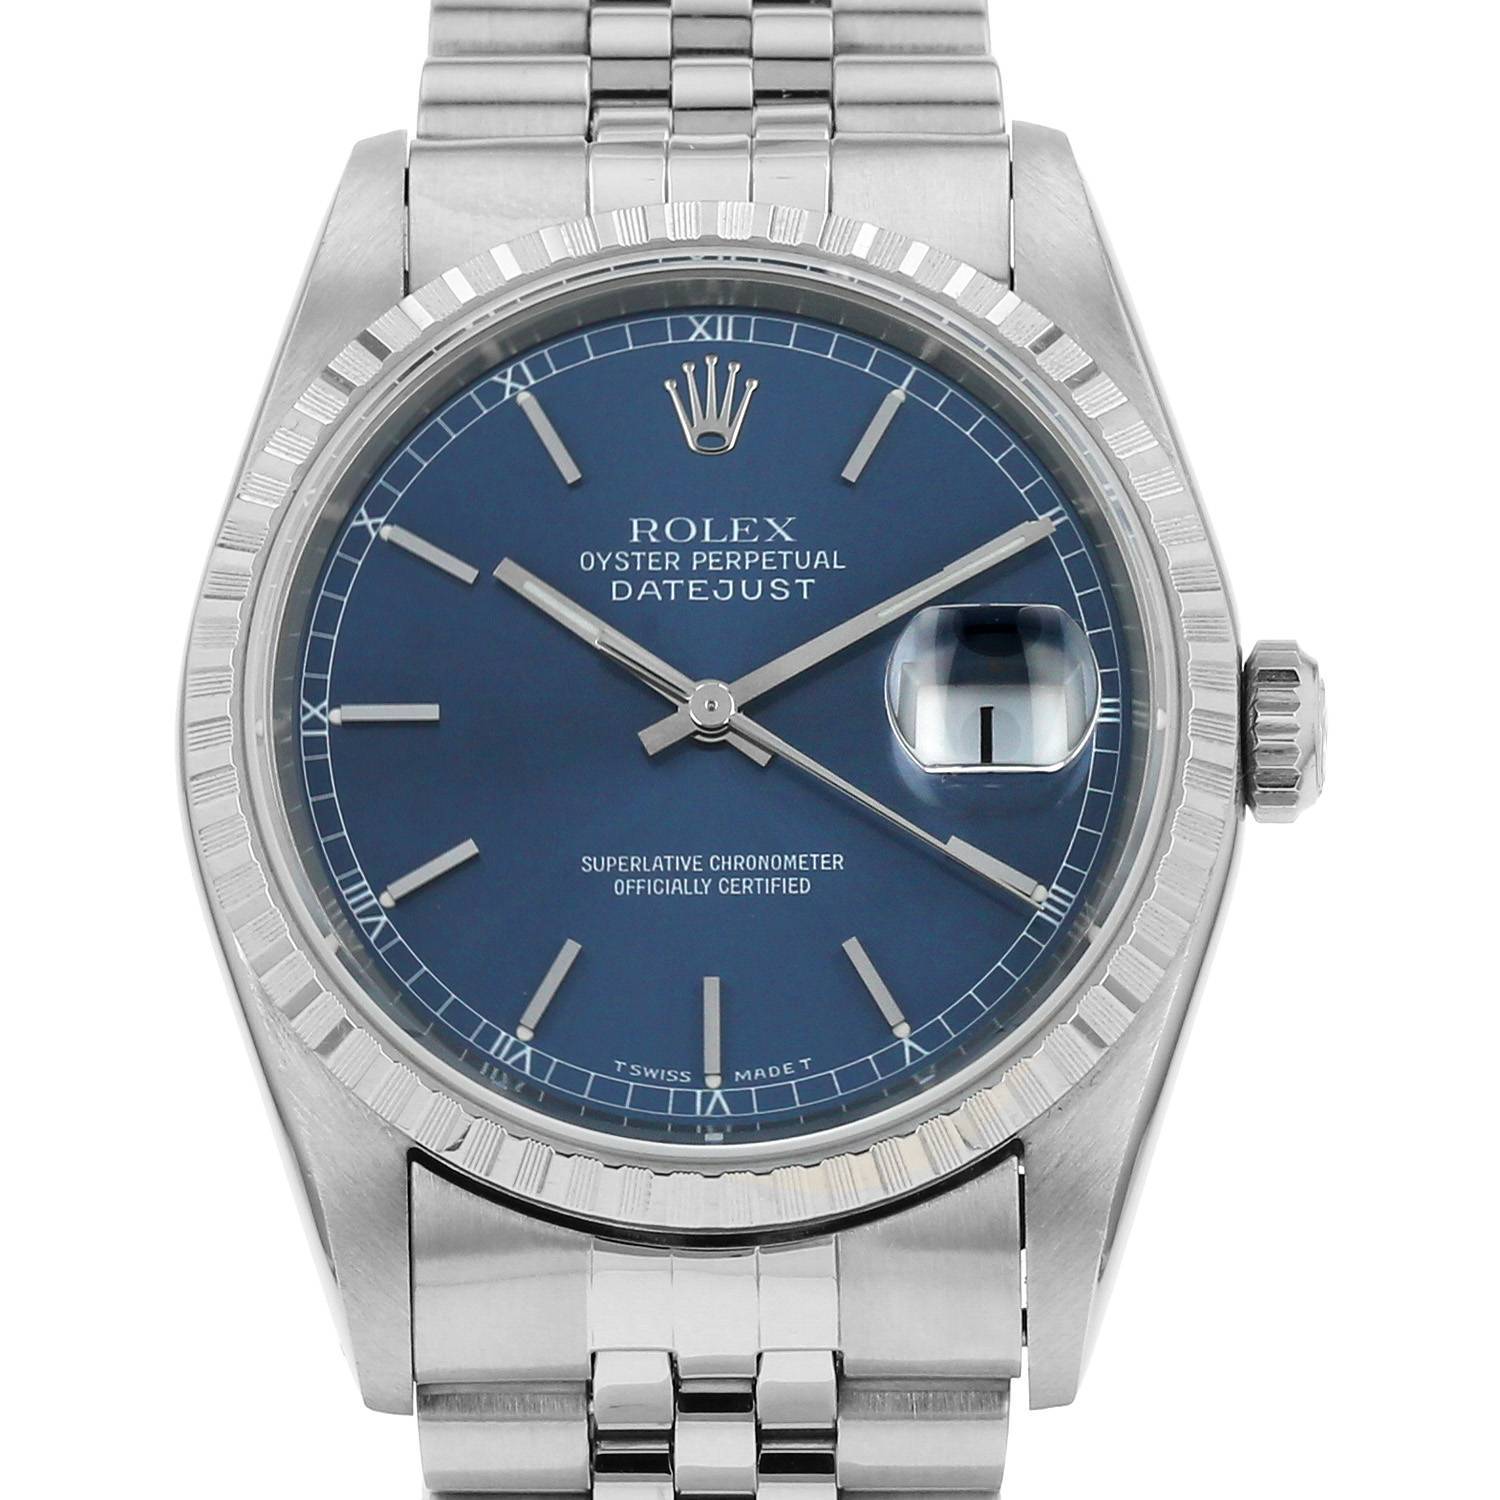 Datejust In Stainless Steel Ref: 16220 Circa 1995